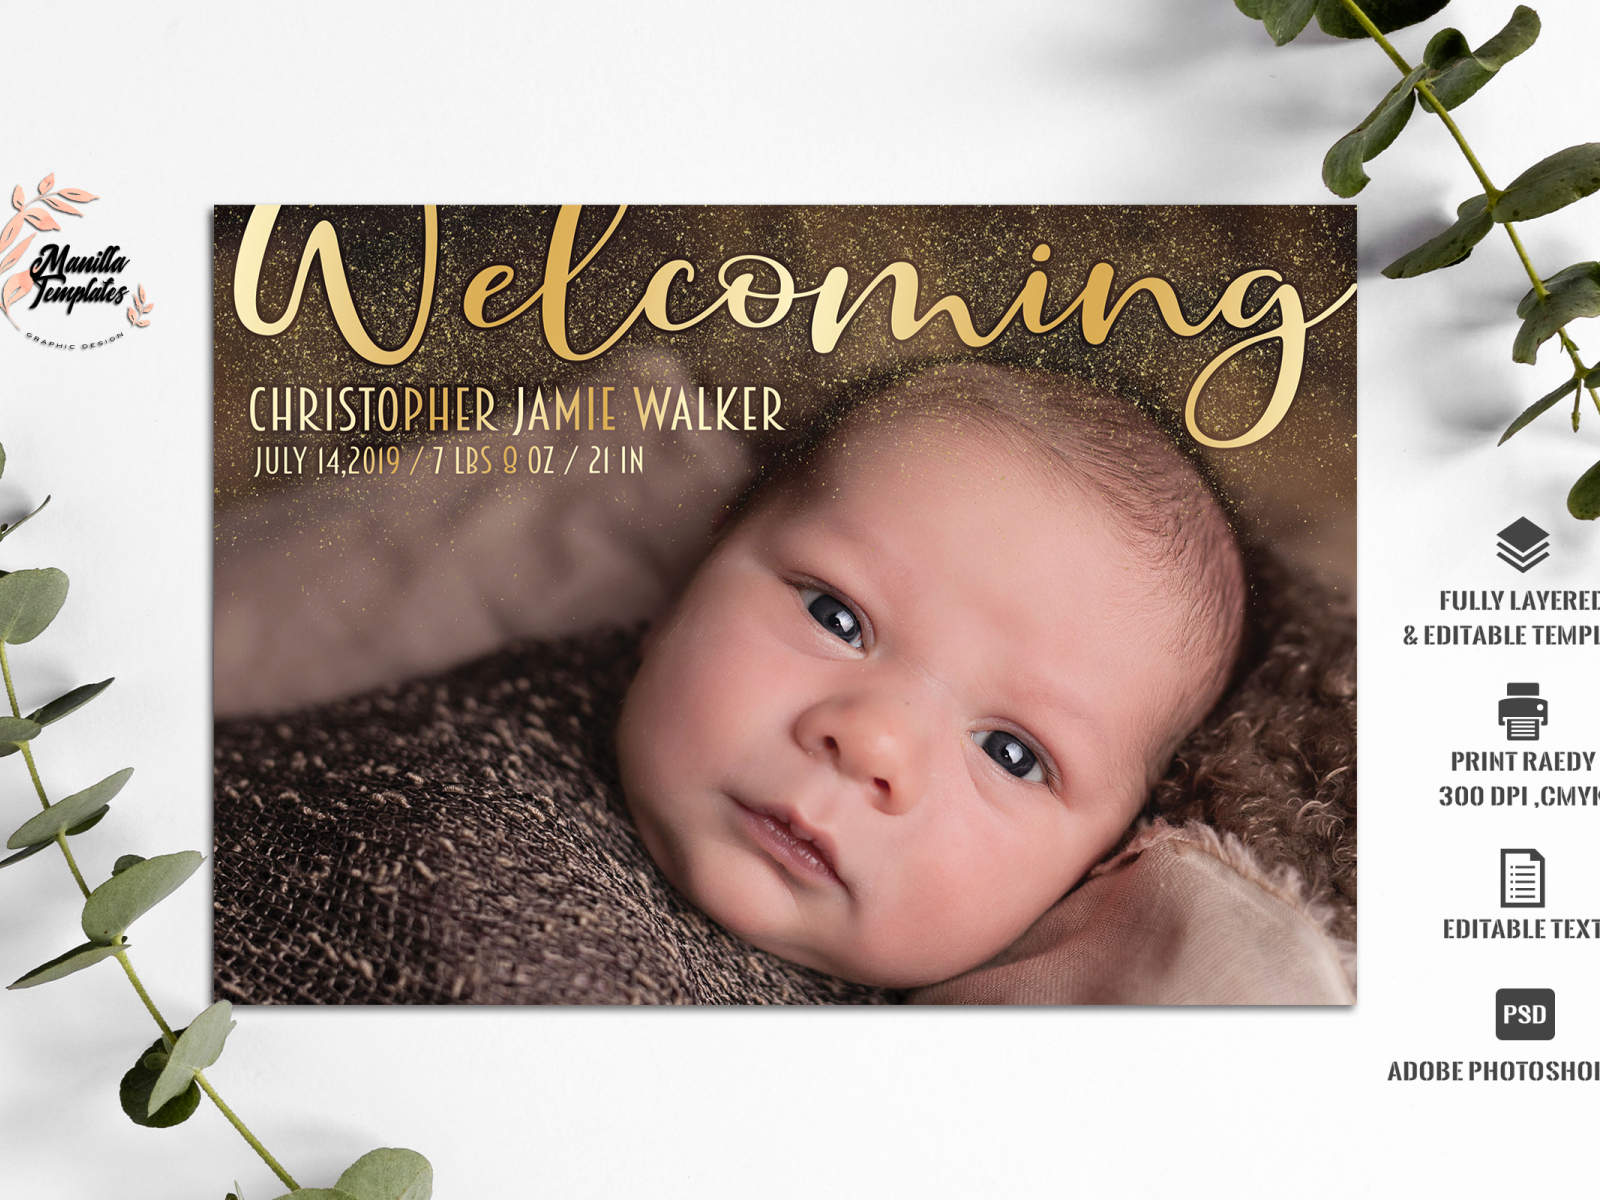 Baby Announcement Card Template by Manilla Designs on Dribbble